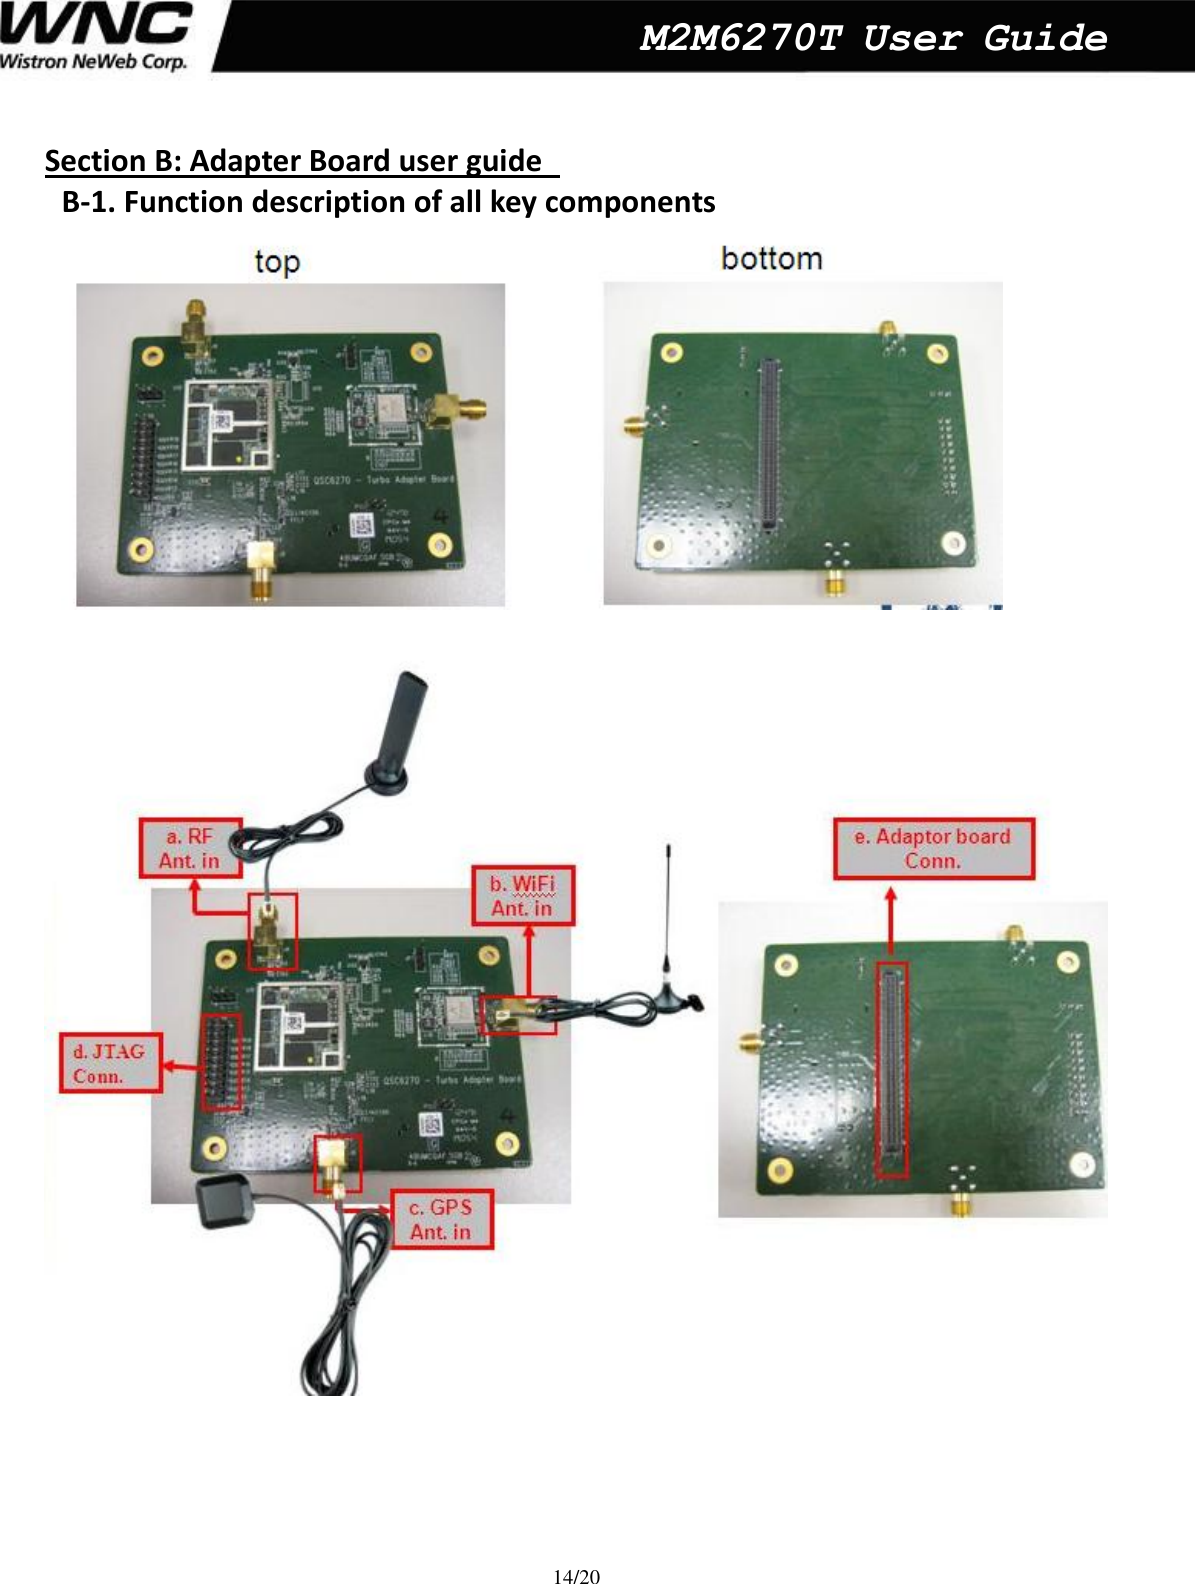  14/20  M2M6270T User Guide Section B: Adapter Board user guide   B-1. Function description of all key components          